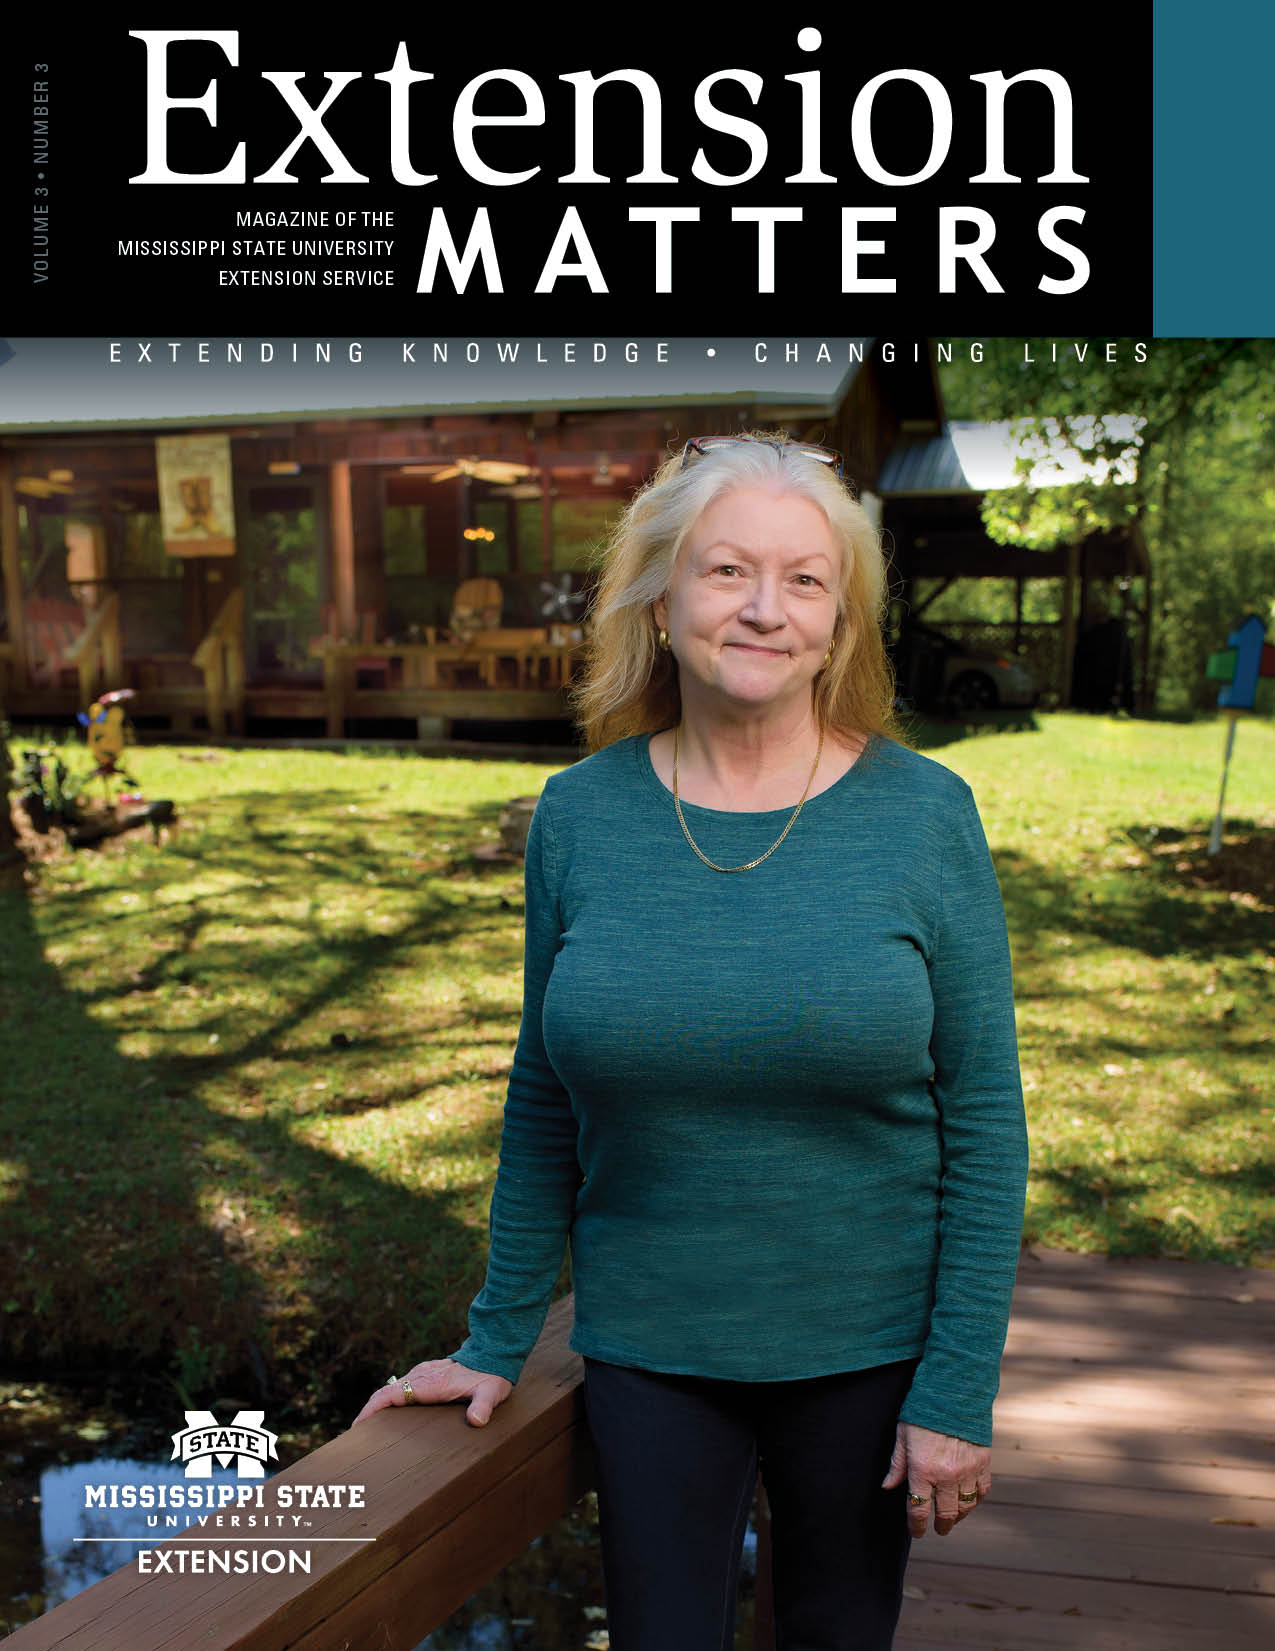 Extension Matters magazine cover showing woman standing in front of home